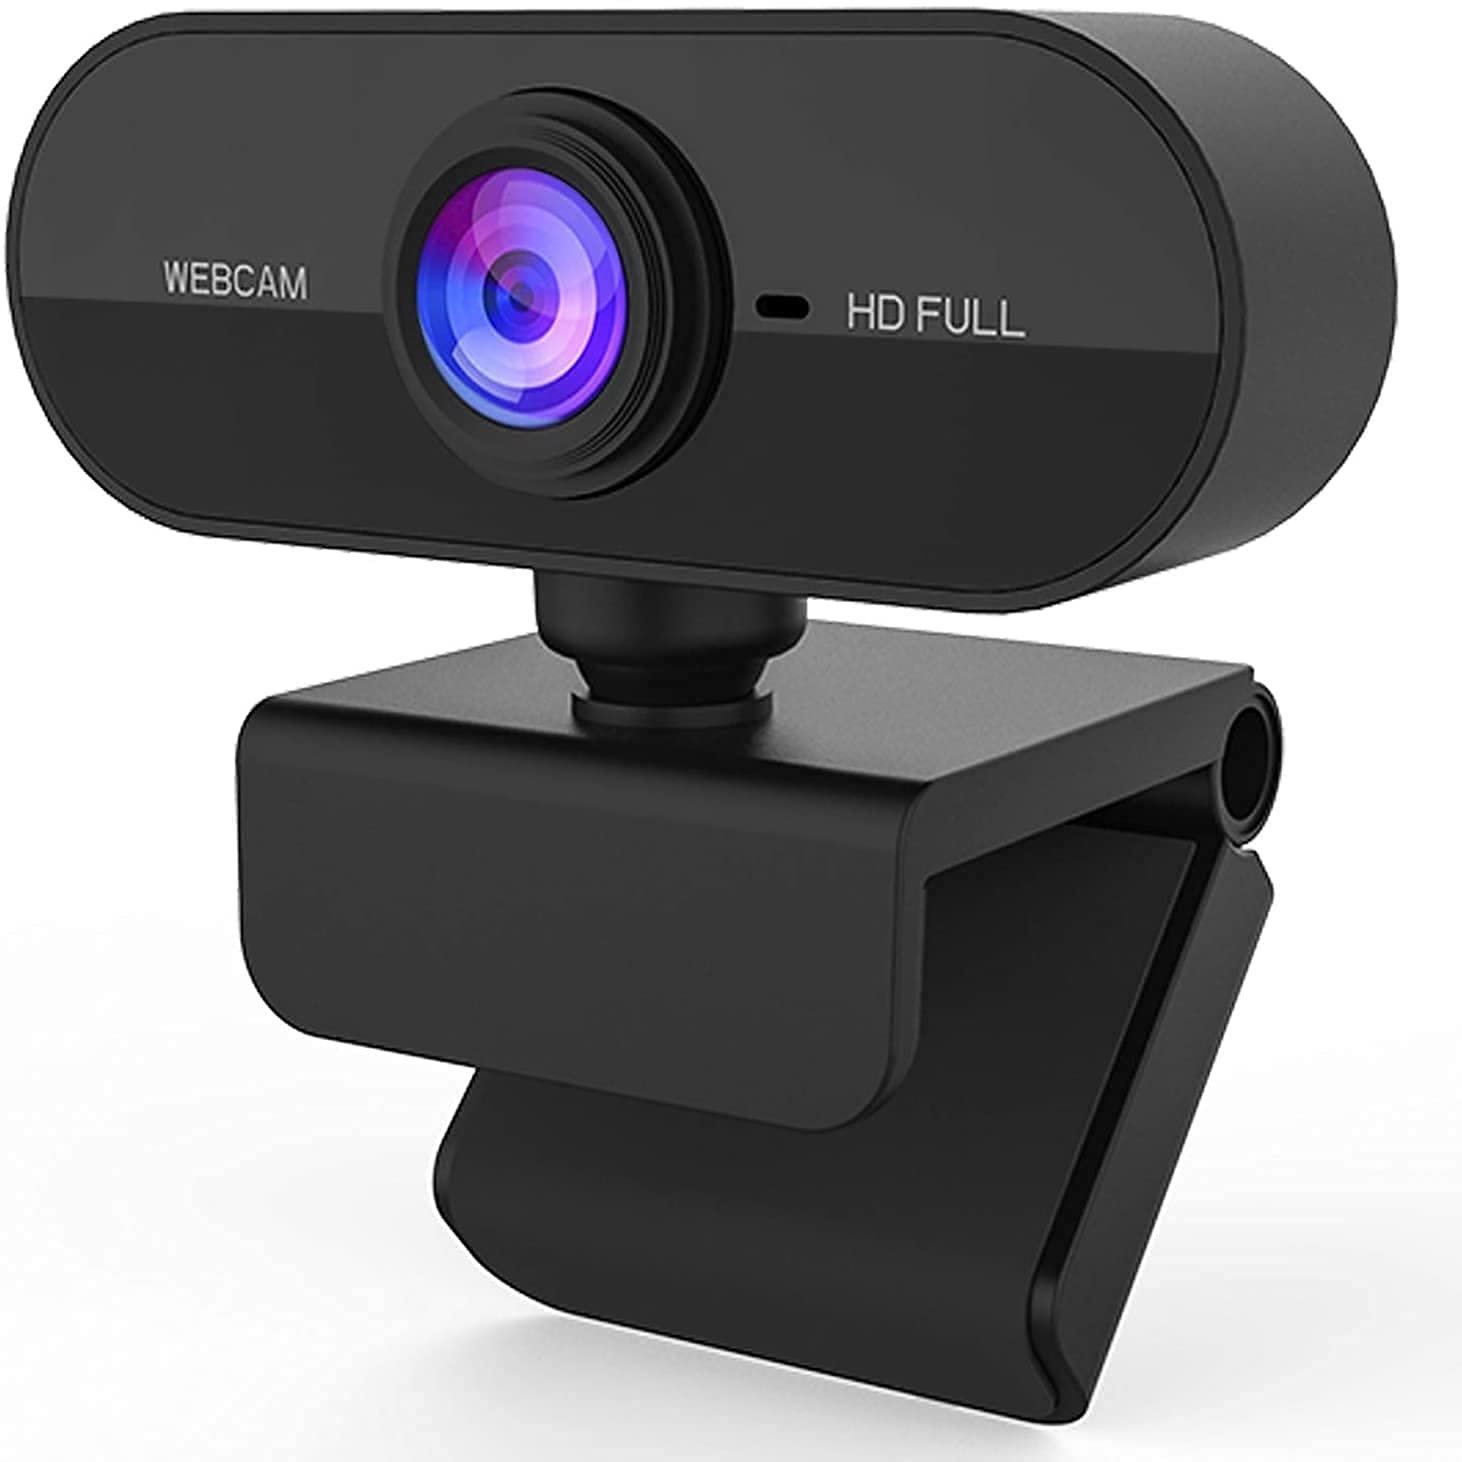 FHD 1080P Webcam with Built-in Mic for Computer, Laptop | 110° Wide Angle Camera & 360° Rotate Webcam for Video Calling